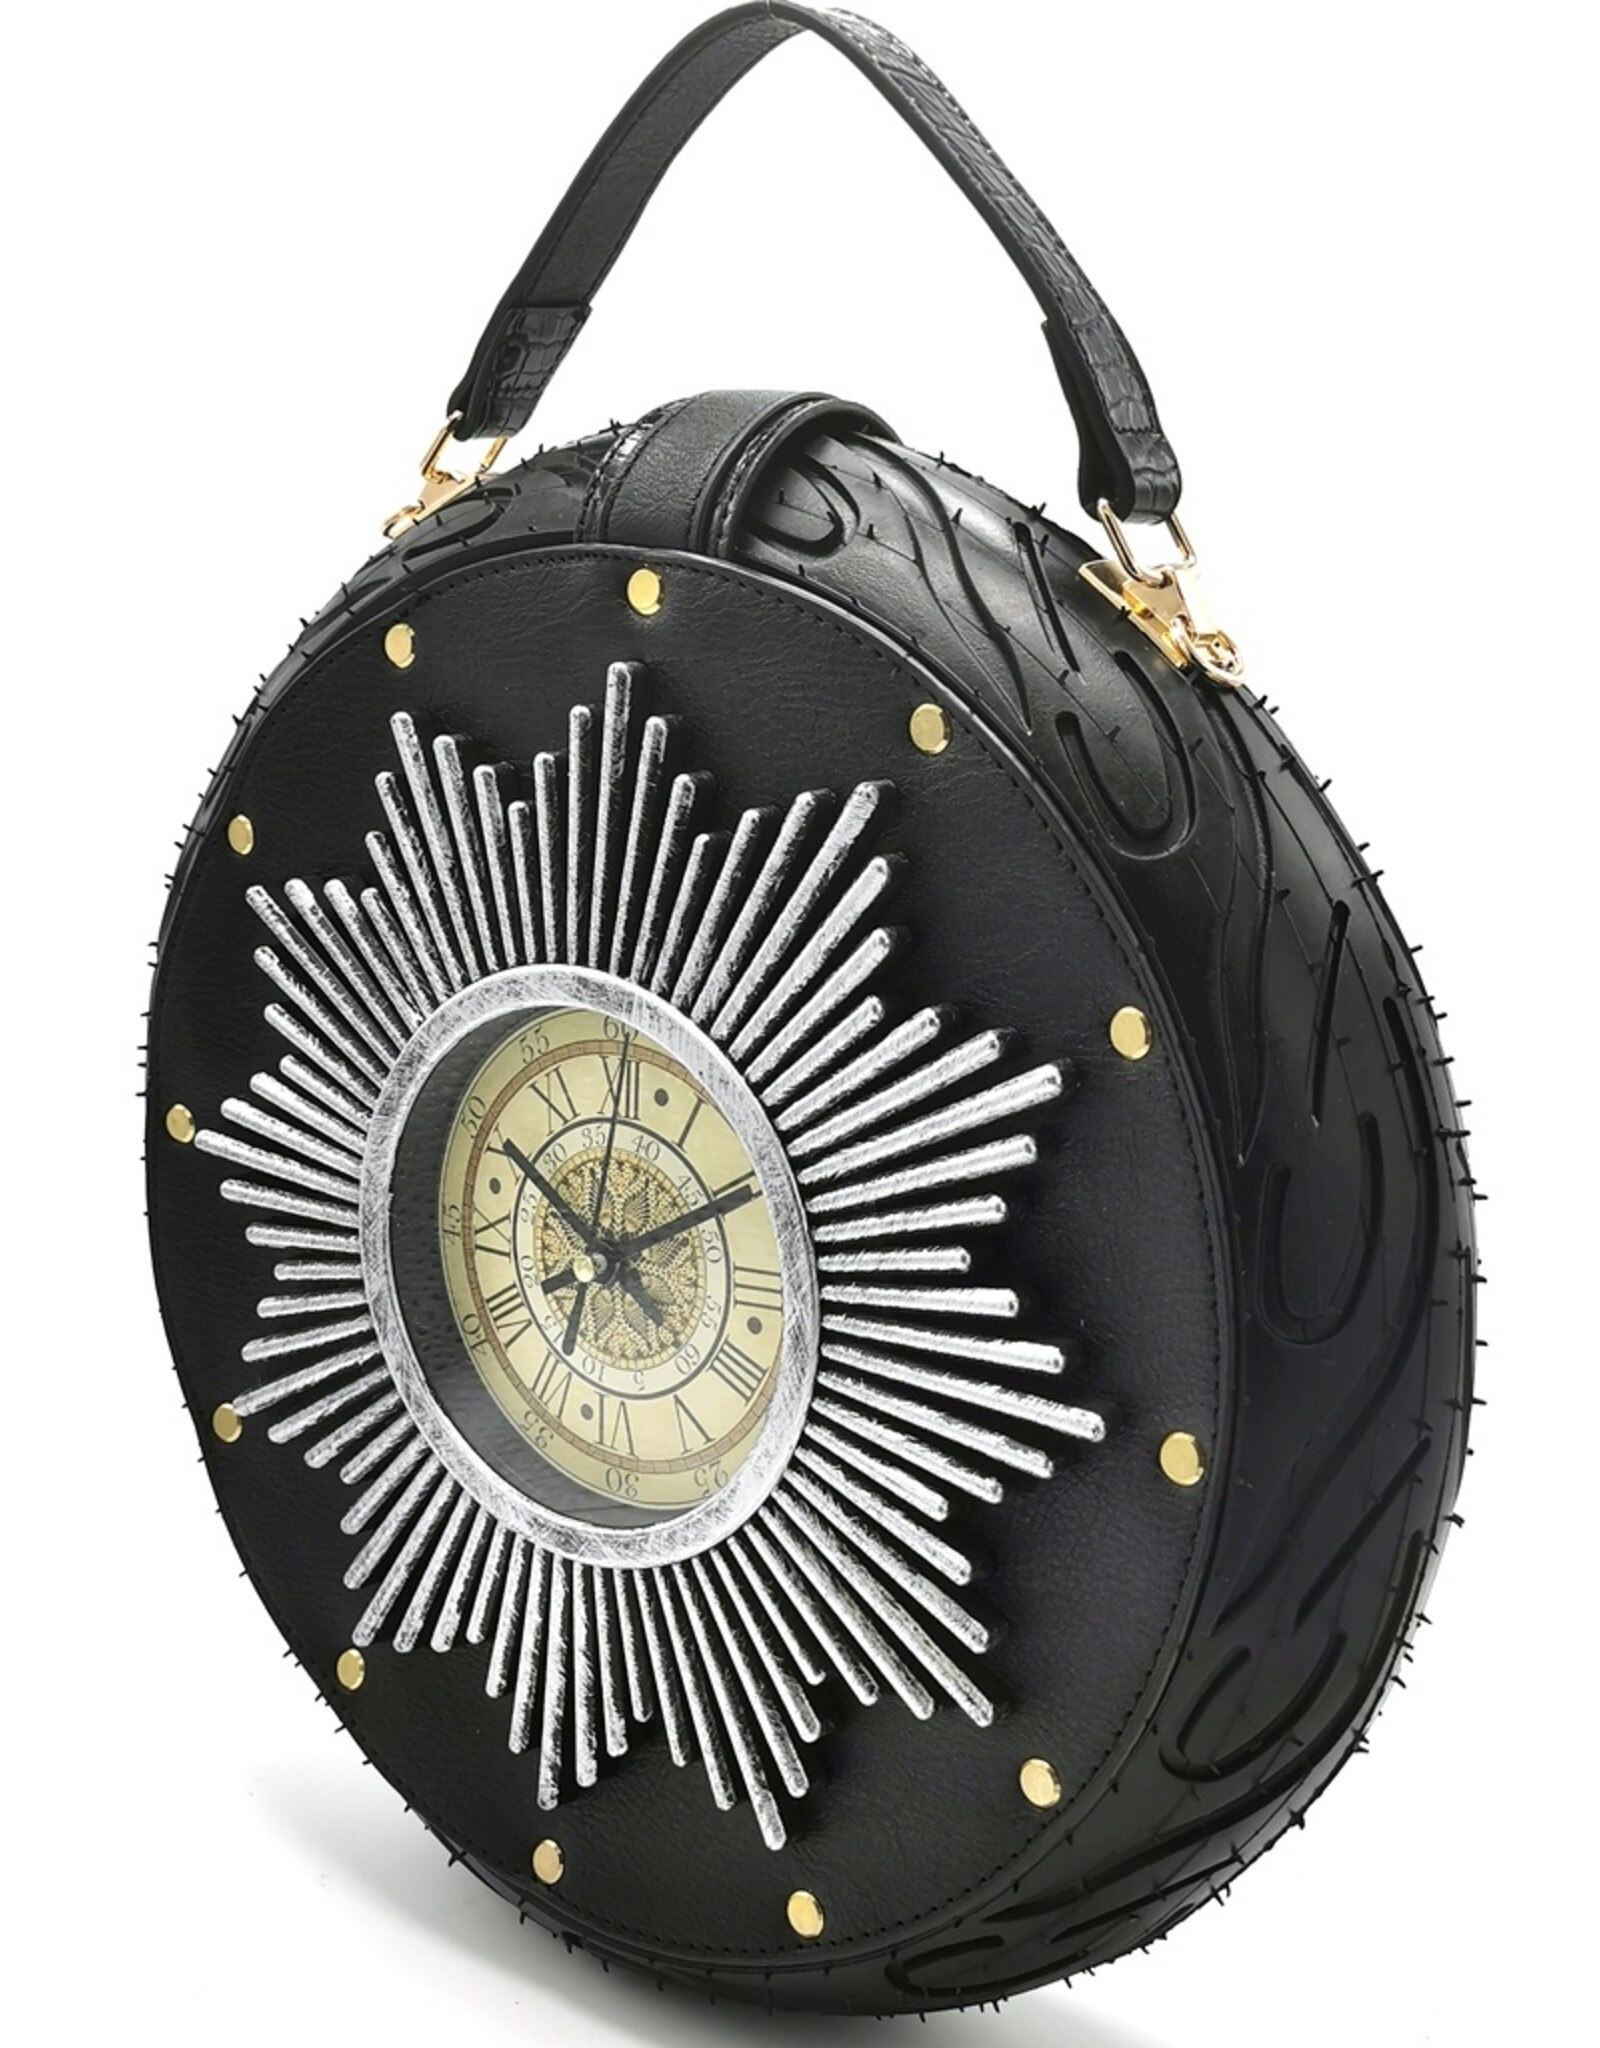 Magic Bags Fantasy bags and wallets - Clock bag with Working Clock Raceband Black (large)